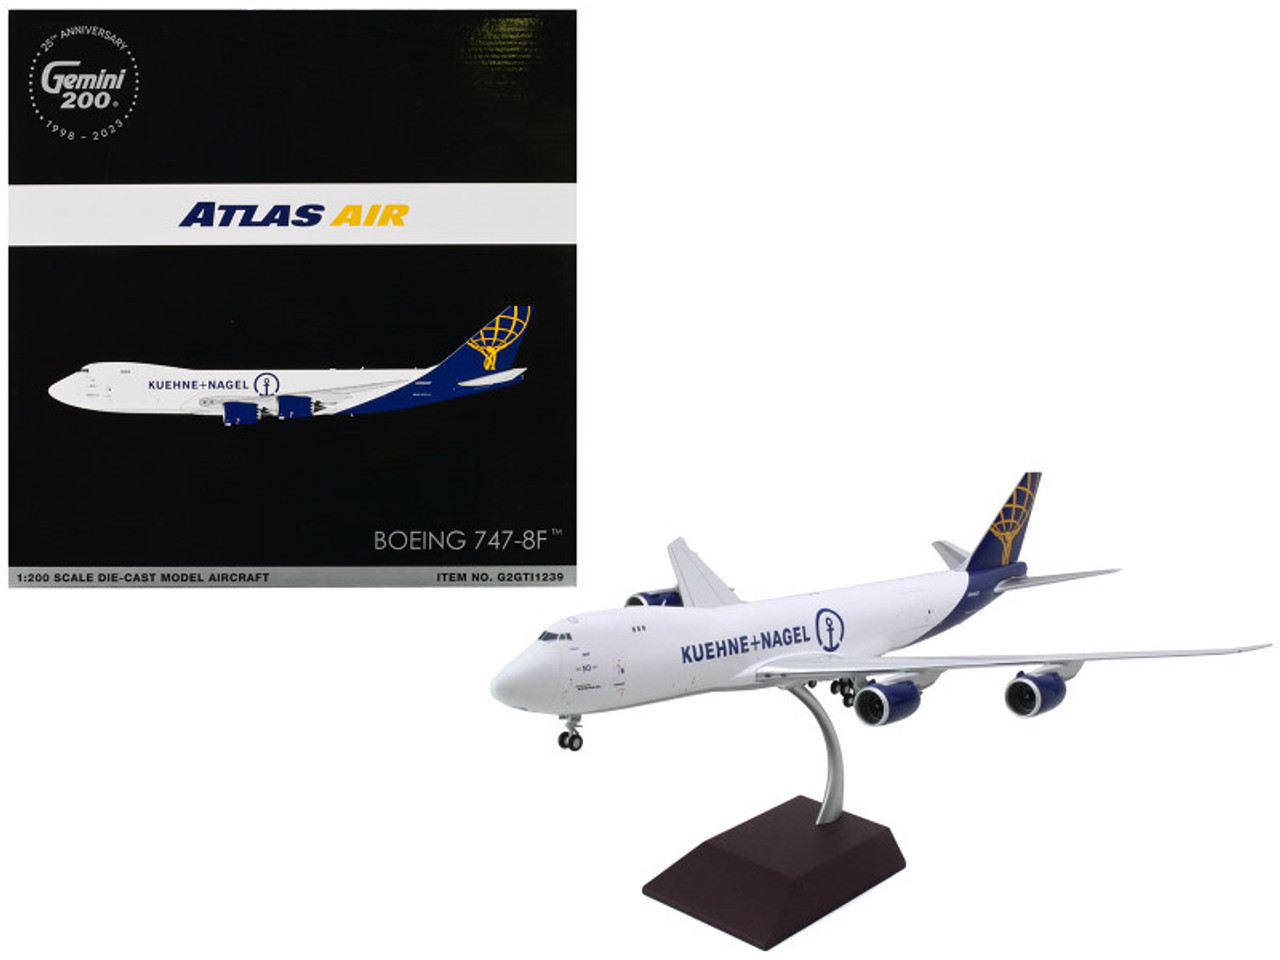 Boeing 747-8F Commercial Aircraft "Atlas Air - Kuene+Nagel" (N862GT) White with Blue Tail "Gemini 200" Series 1/200 Diecast Model Airplane by GeminiJets